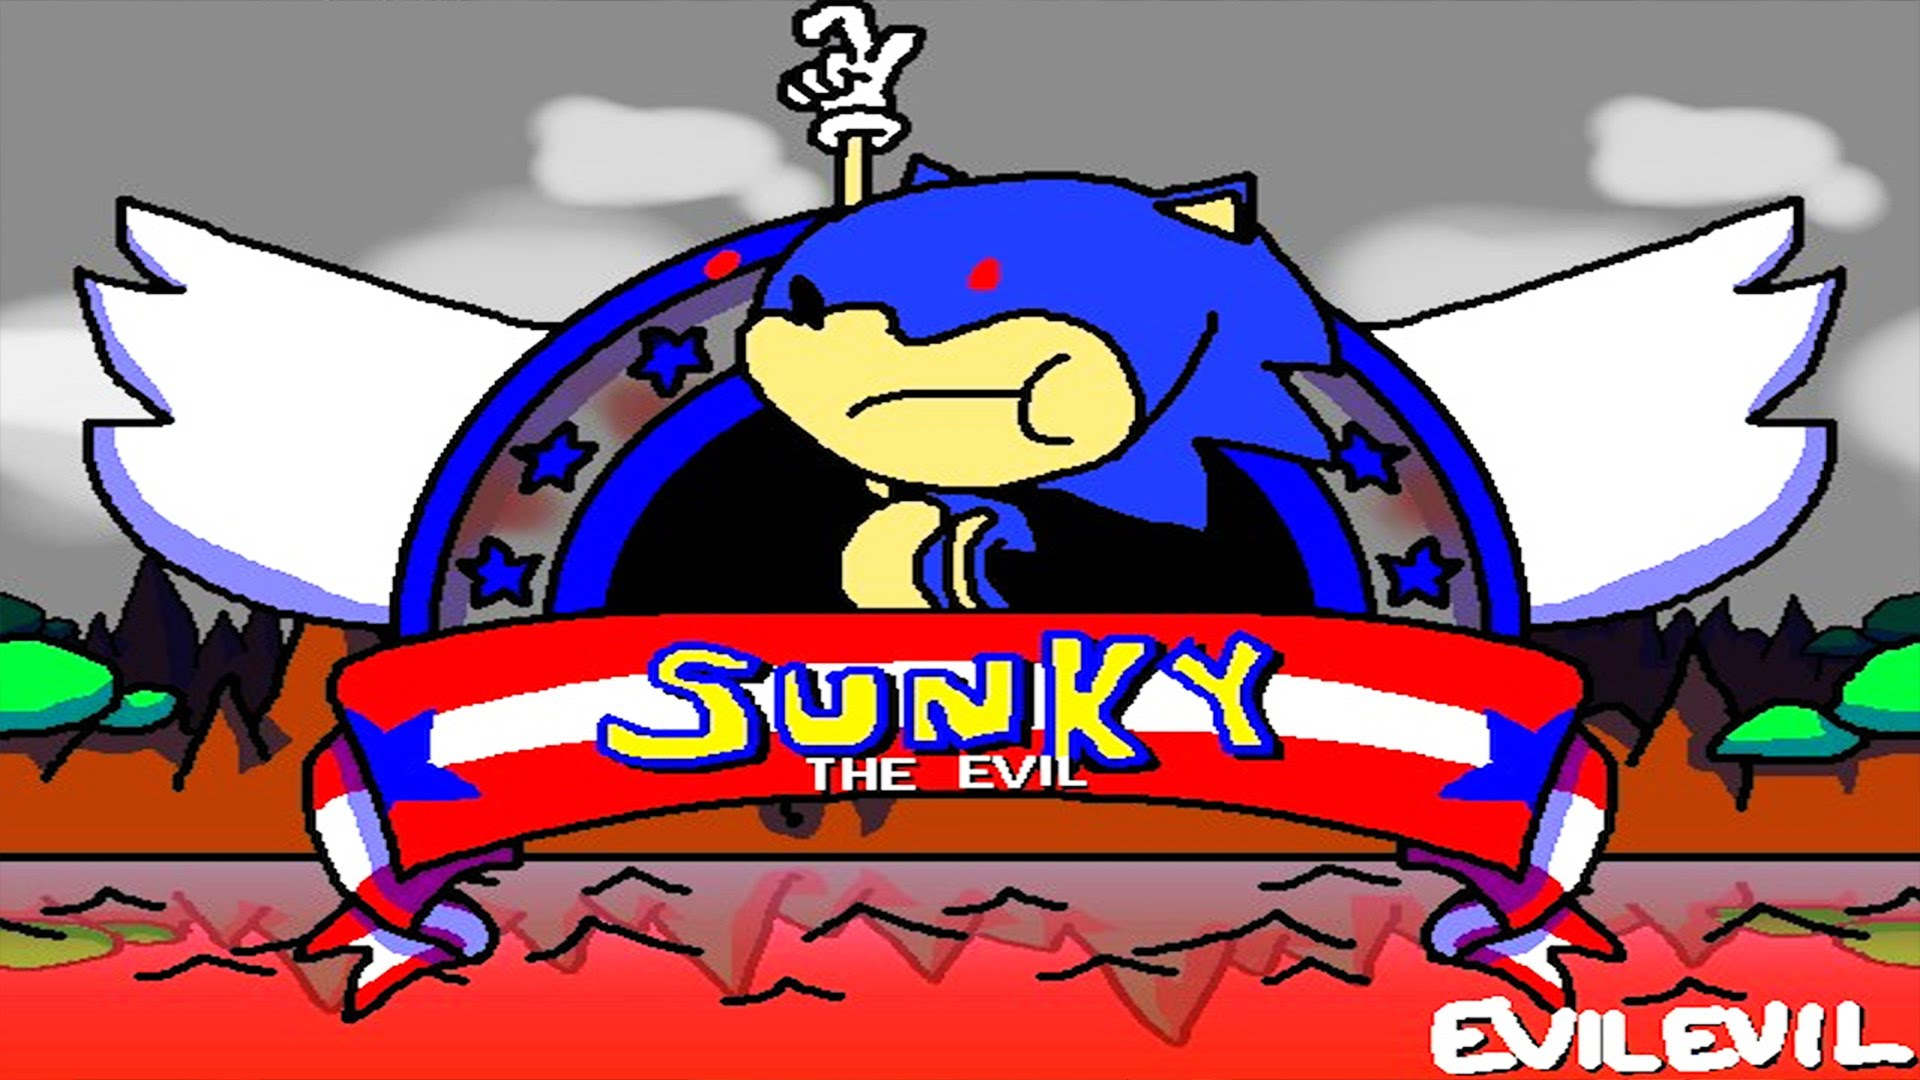 The Sunky Collection (Sunky the game,Sunky 2, Sunky.mpeg & Silly.TIFF) 